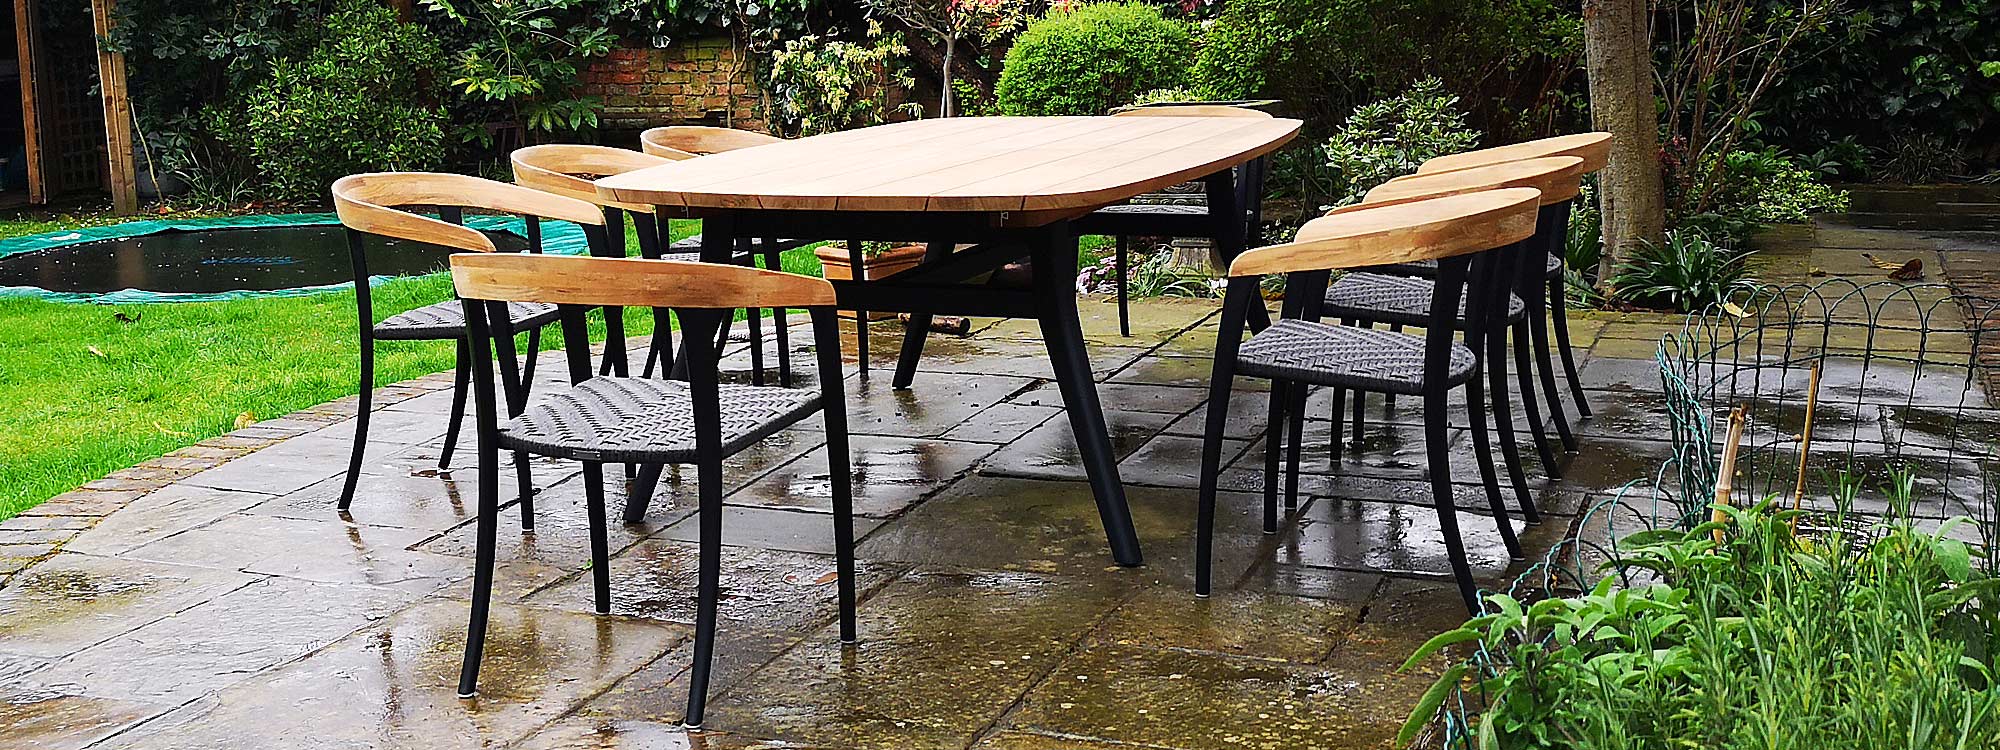 Image of installation of Royal Botania Zidiz table and Jive chairs in London